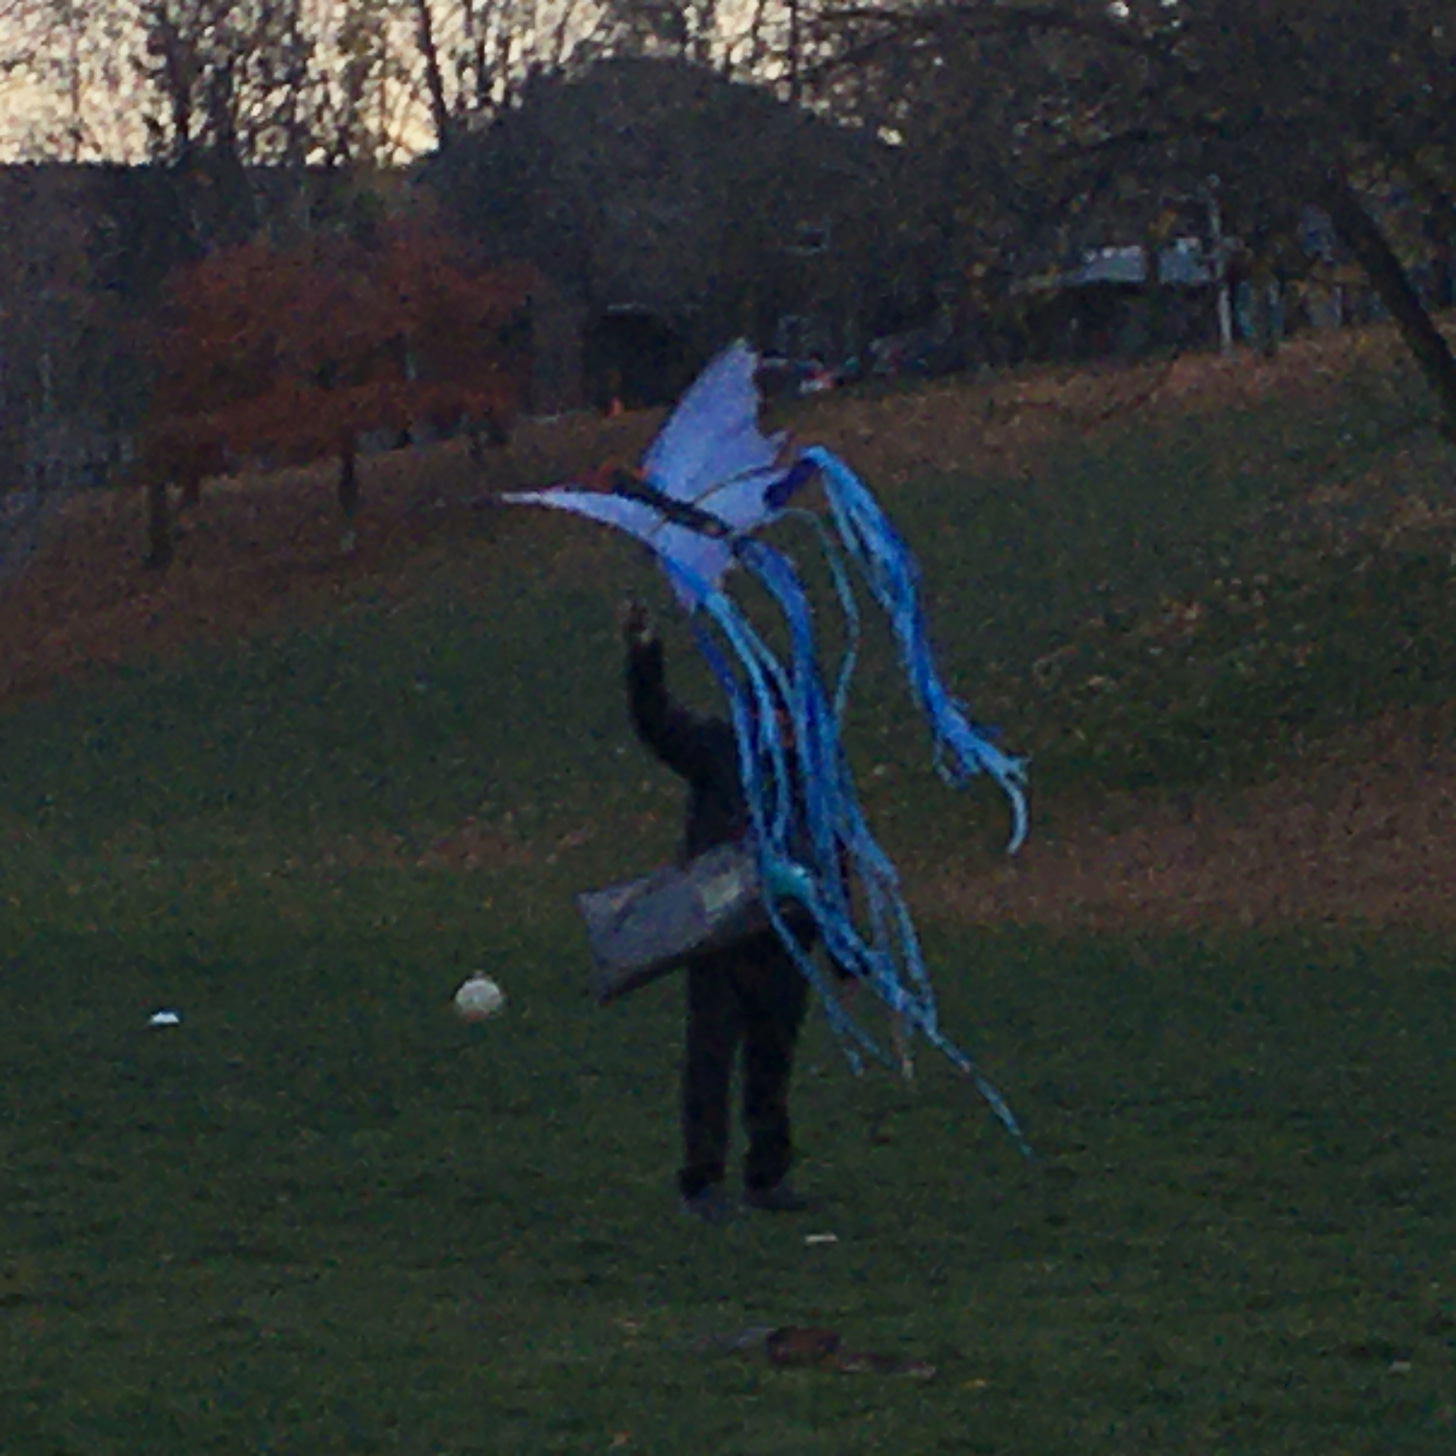 A man struggling to launch a beautiful blue butterfly kite on a windy November day in a Toronto park.